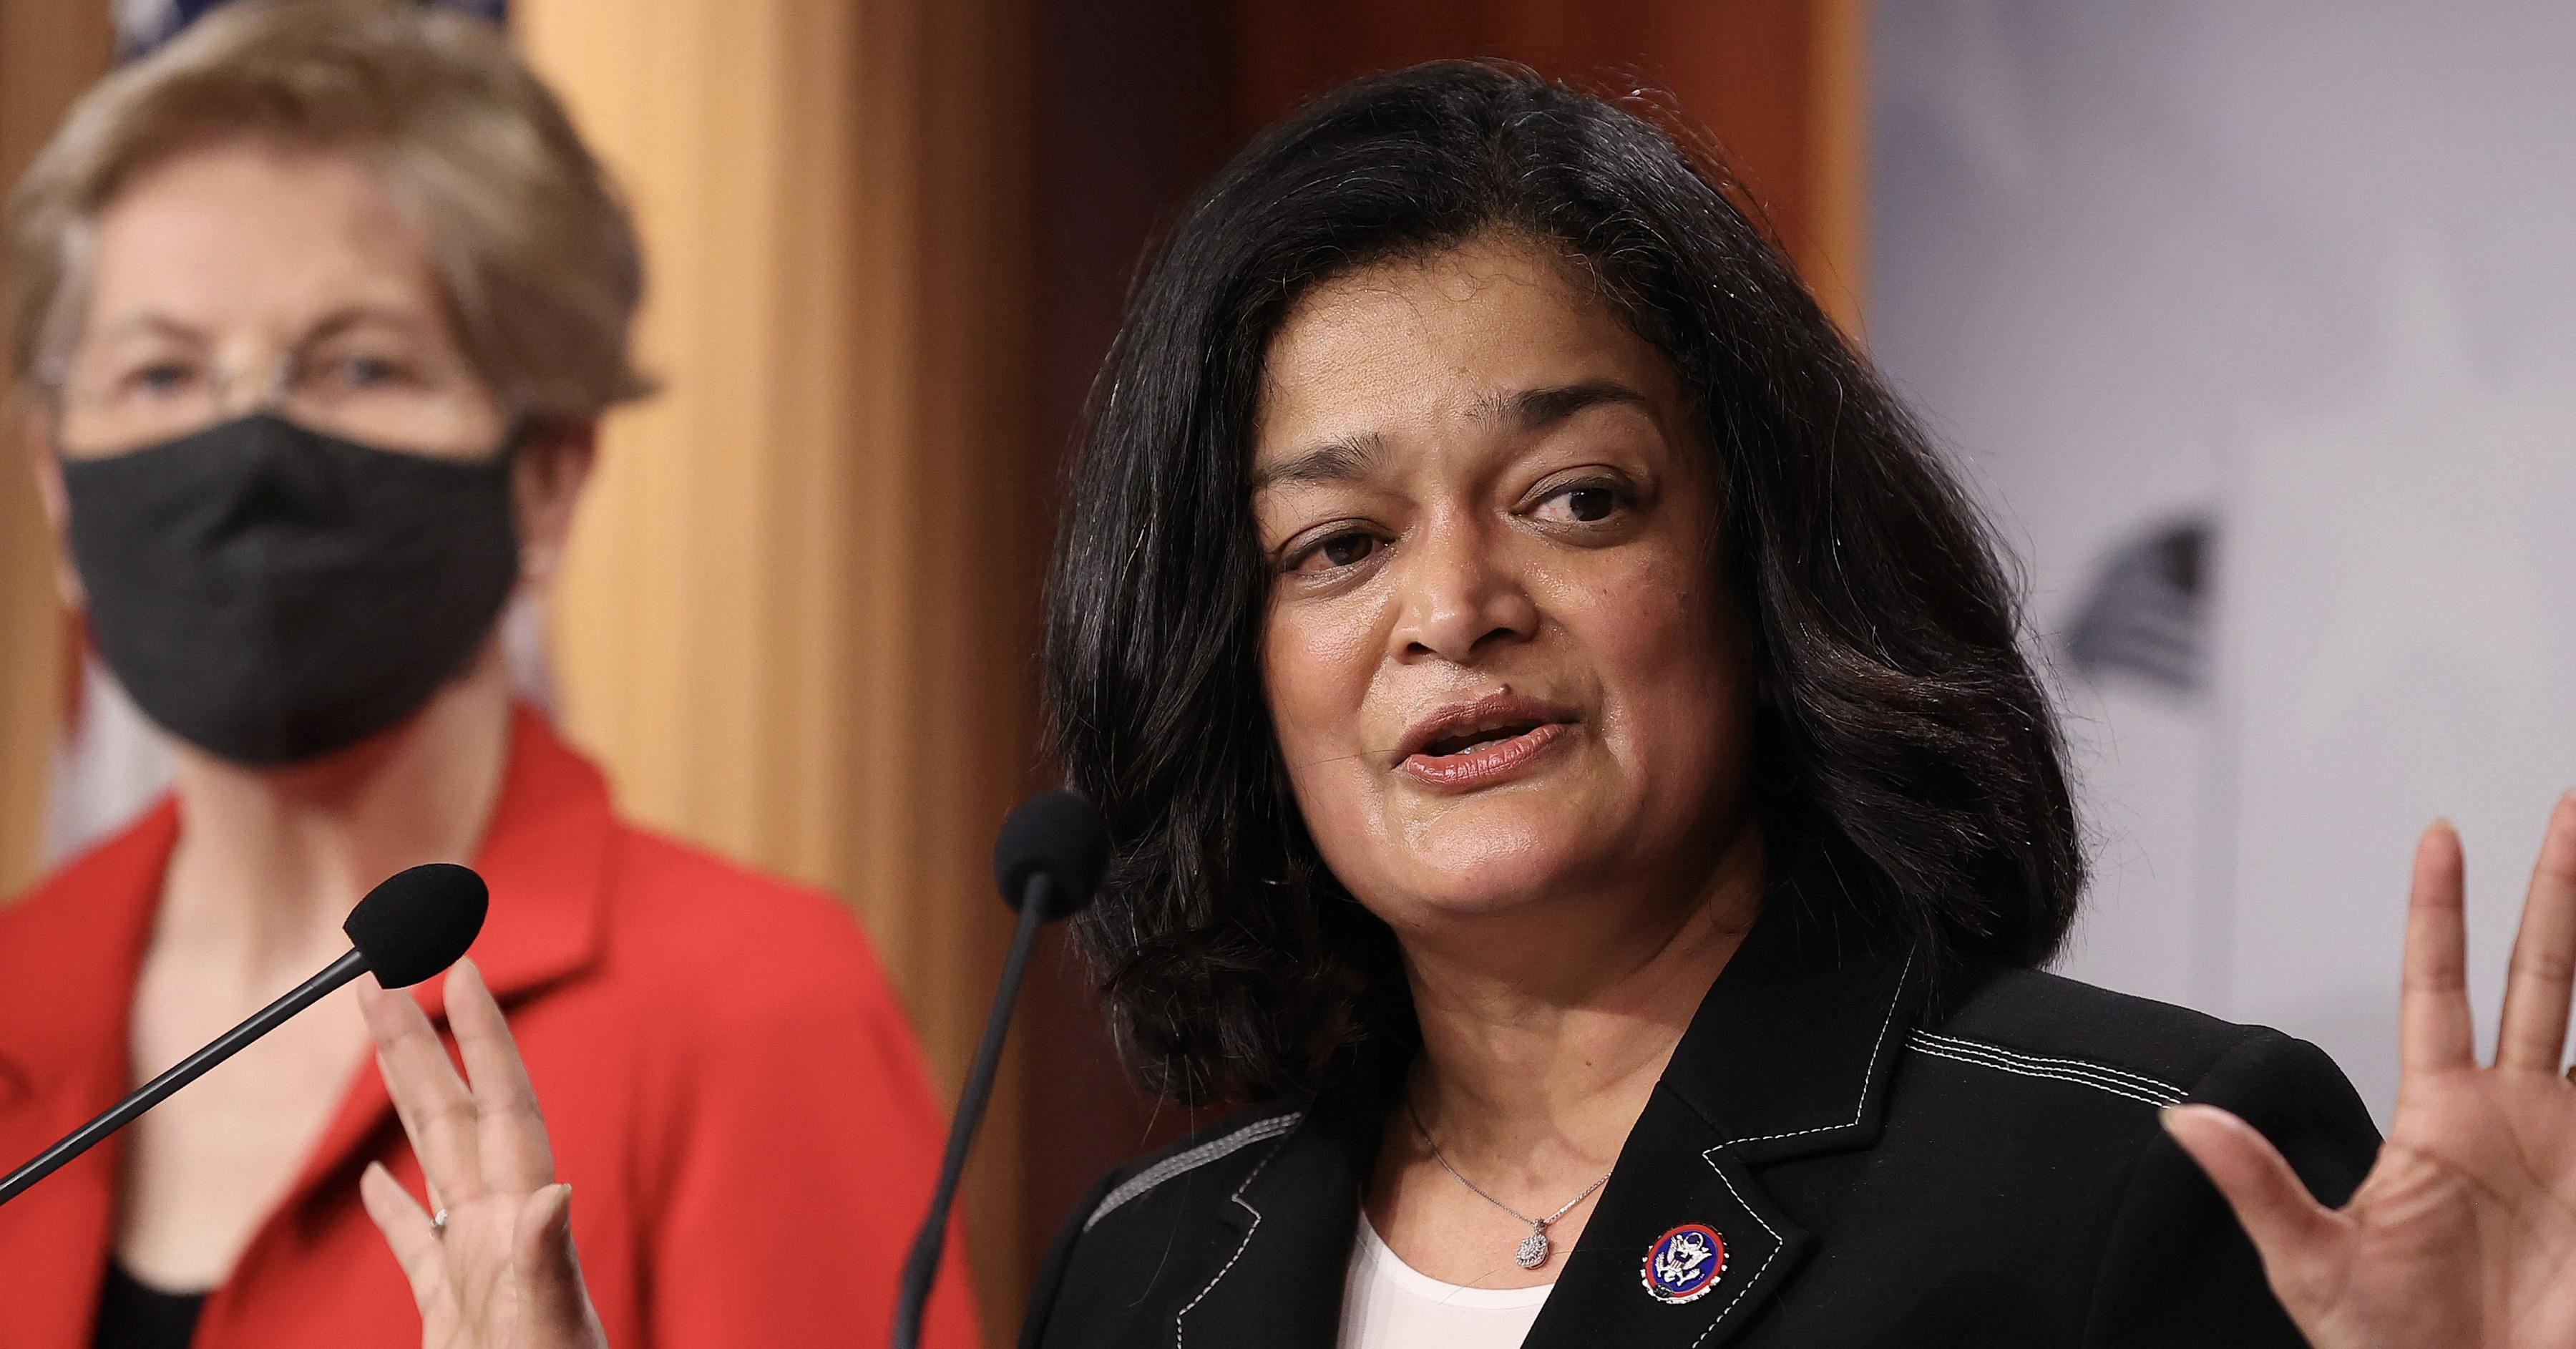 Rep. Pramila Jayapal (D-WA) speaks during a news conference with Sen. Elizabeth Warren (D-MA) to announce legislation that would tax the net worth of America's wealthiest individuals at the U.S. Capitol on March 01, 2021 in Washington, DC. (Photo: Chip Somodevilla/Getty Images)